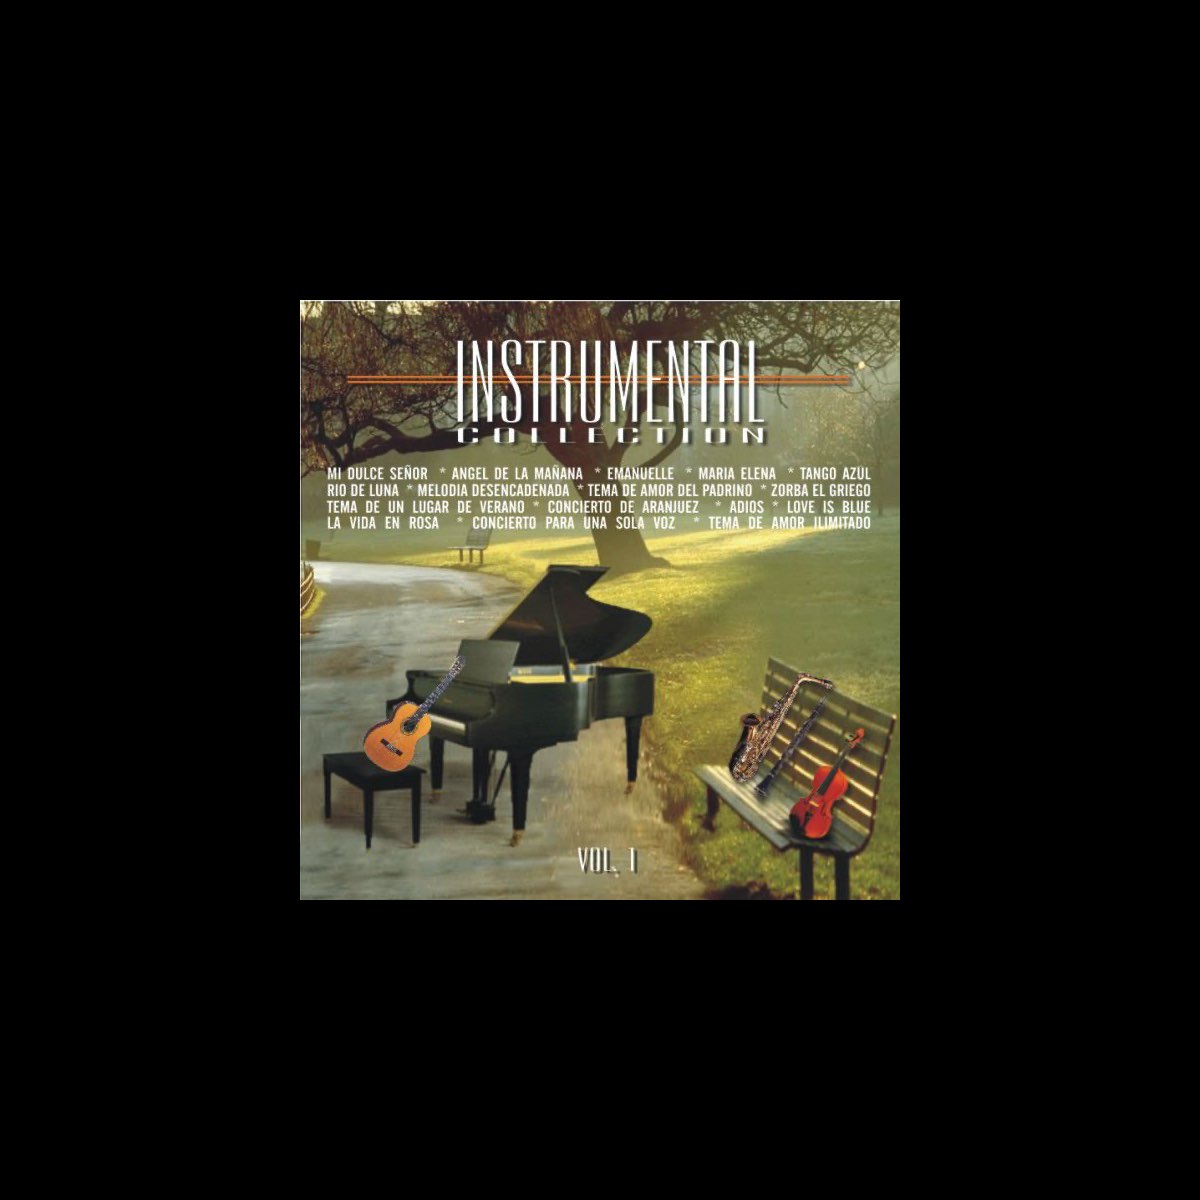 Instrumental Collection, Vol. 1 by Sky Sounds Orchestra on Apple Music